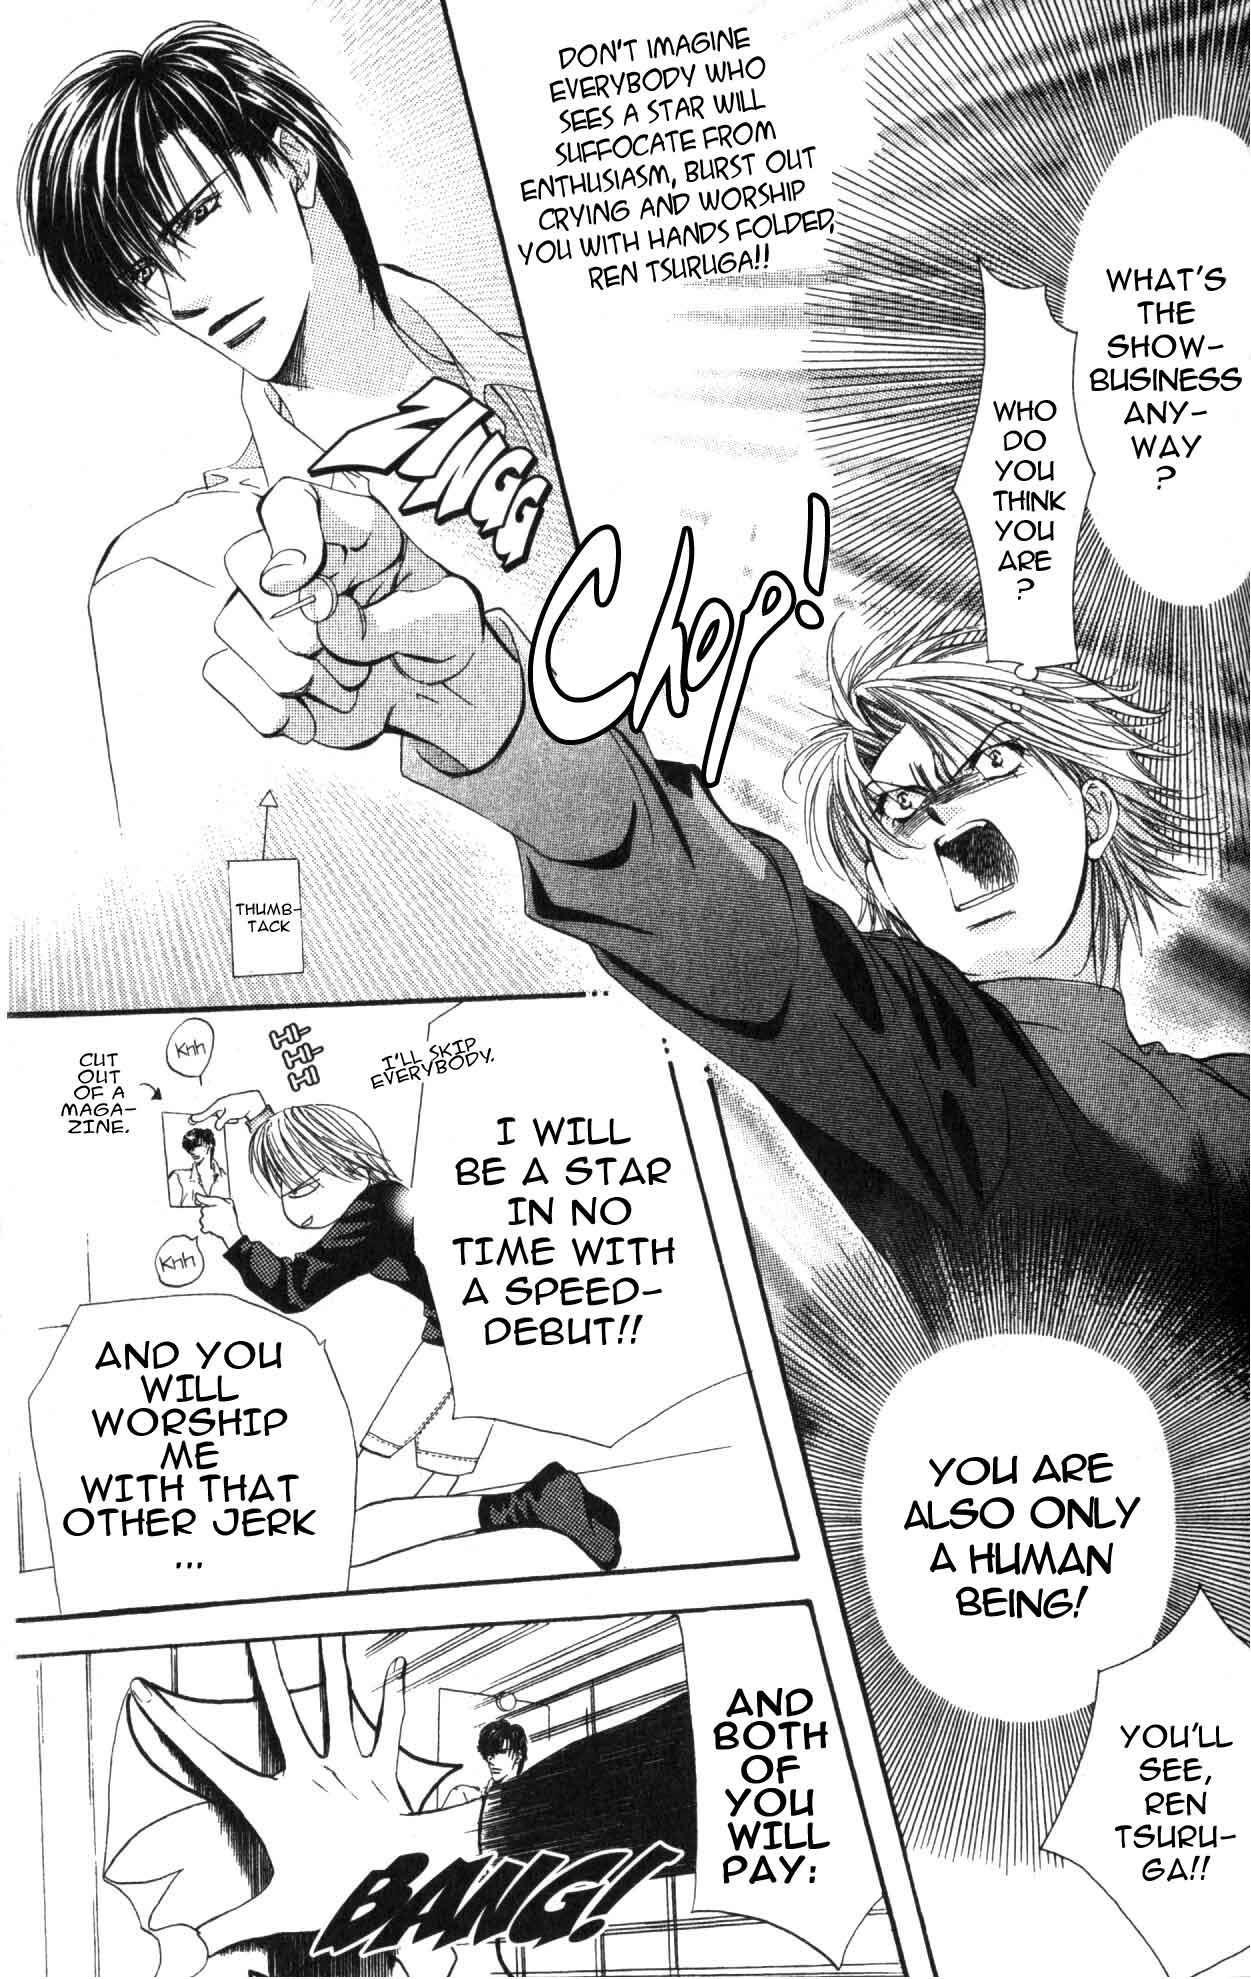 Skip Beat!, Chapter 3 The Feast of Horror, part 1 image 11